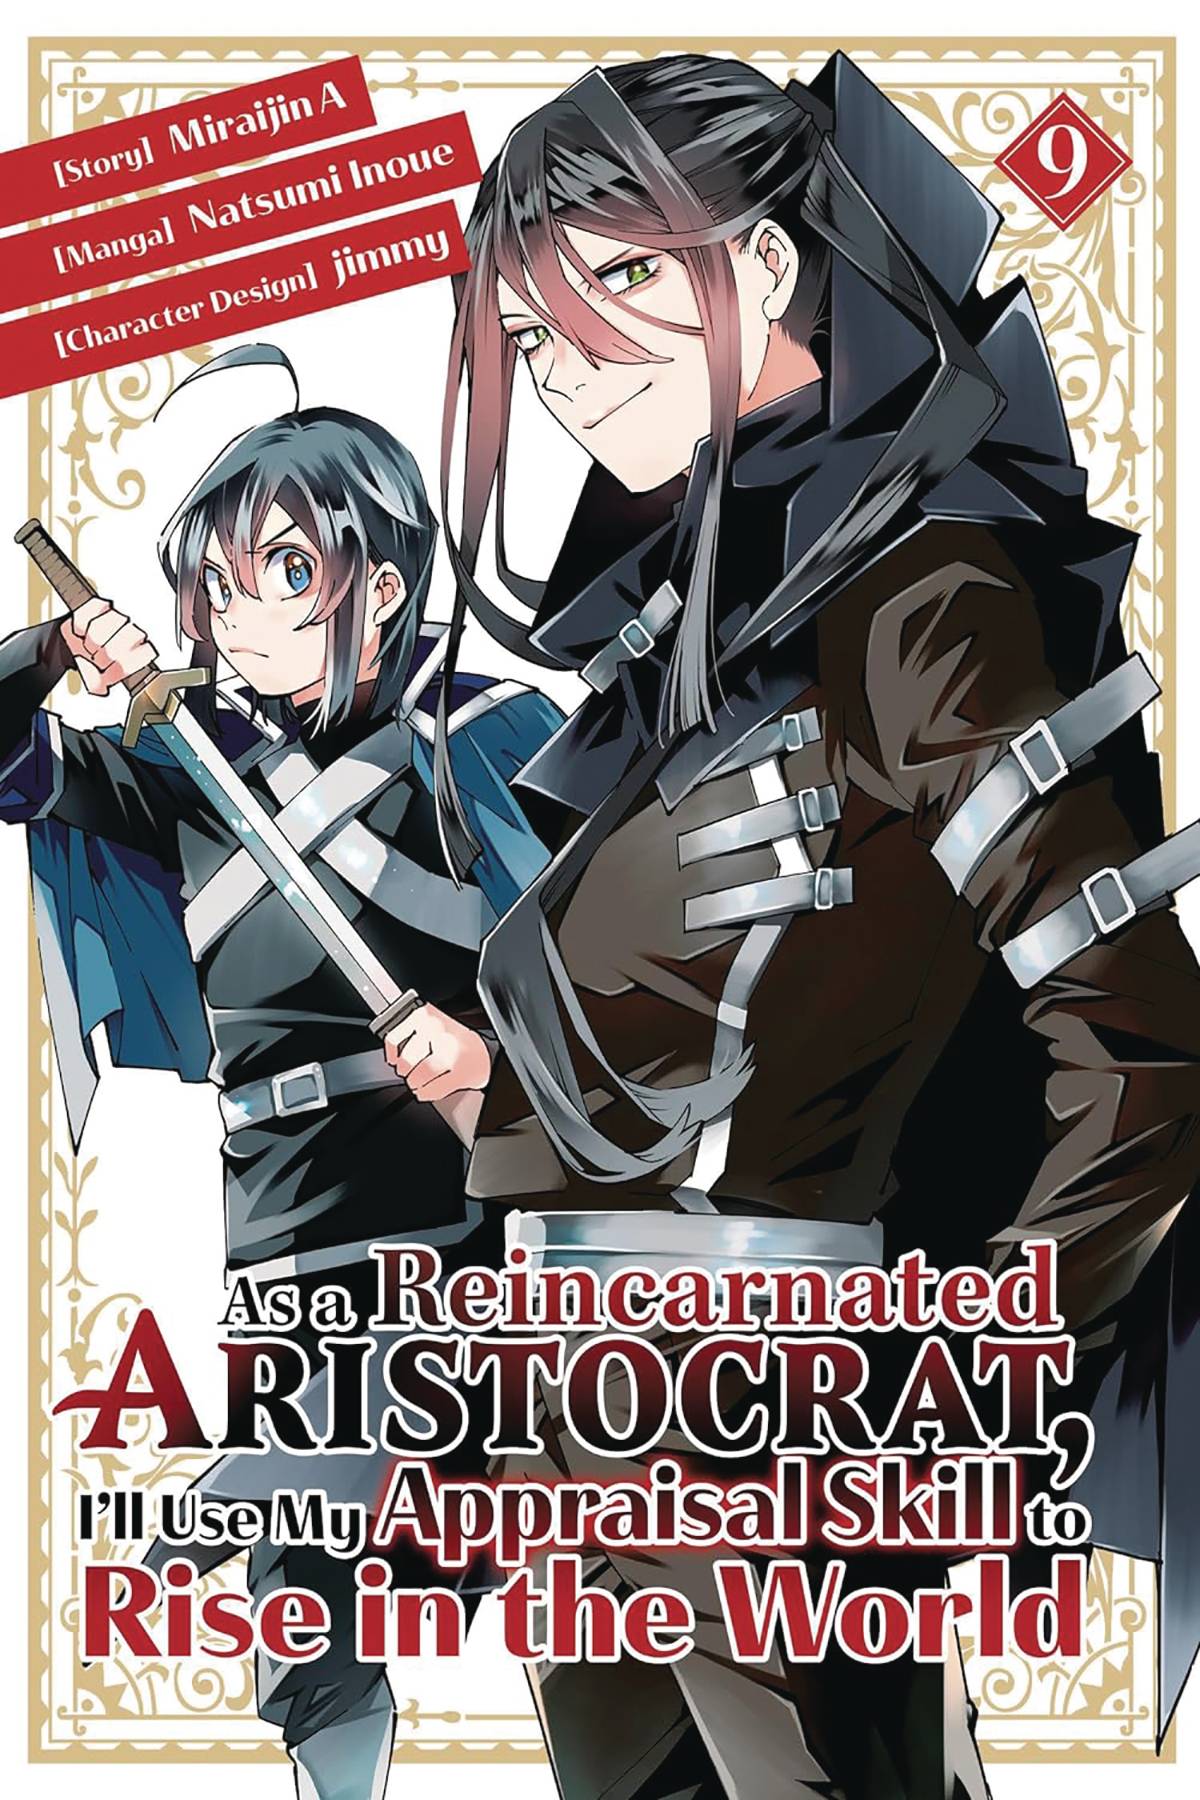 AS A REINCARNATED ARISTOCRAT USE APPRAISAL SKILL GN VOL 09 (